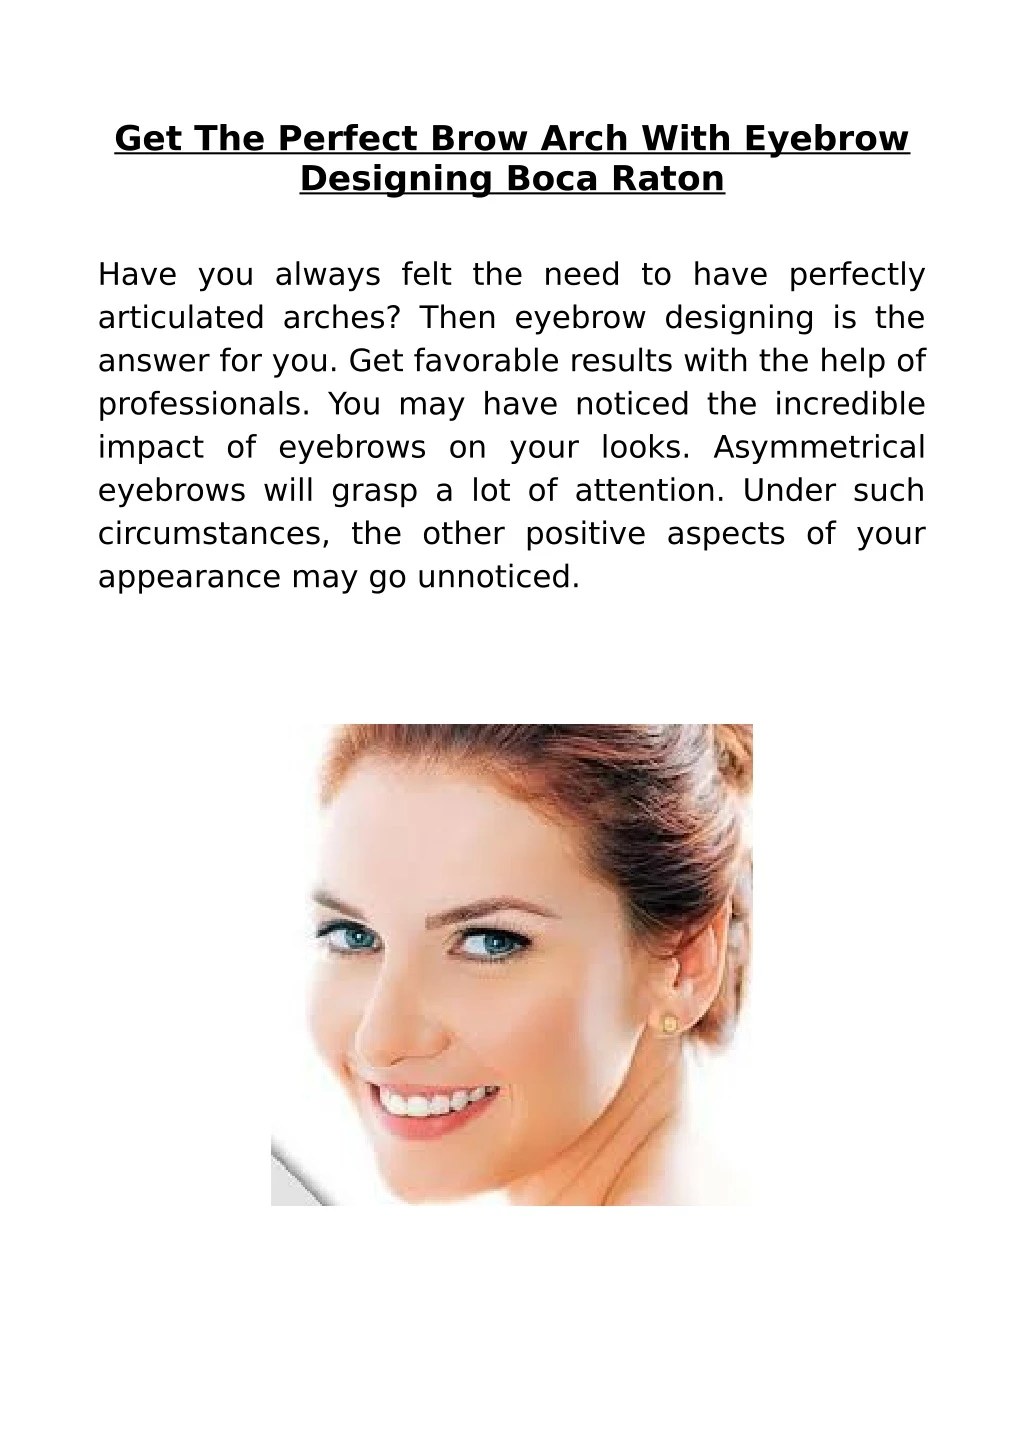 get the perfect brow arch with eyebrow designing